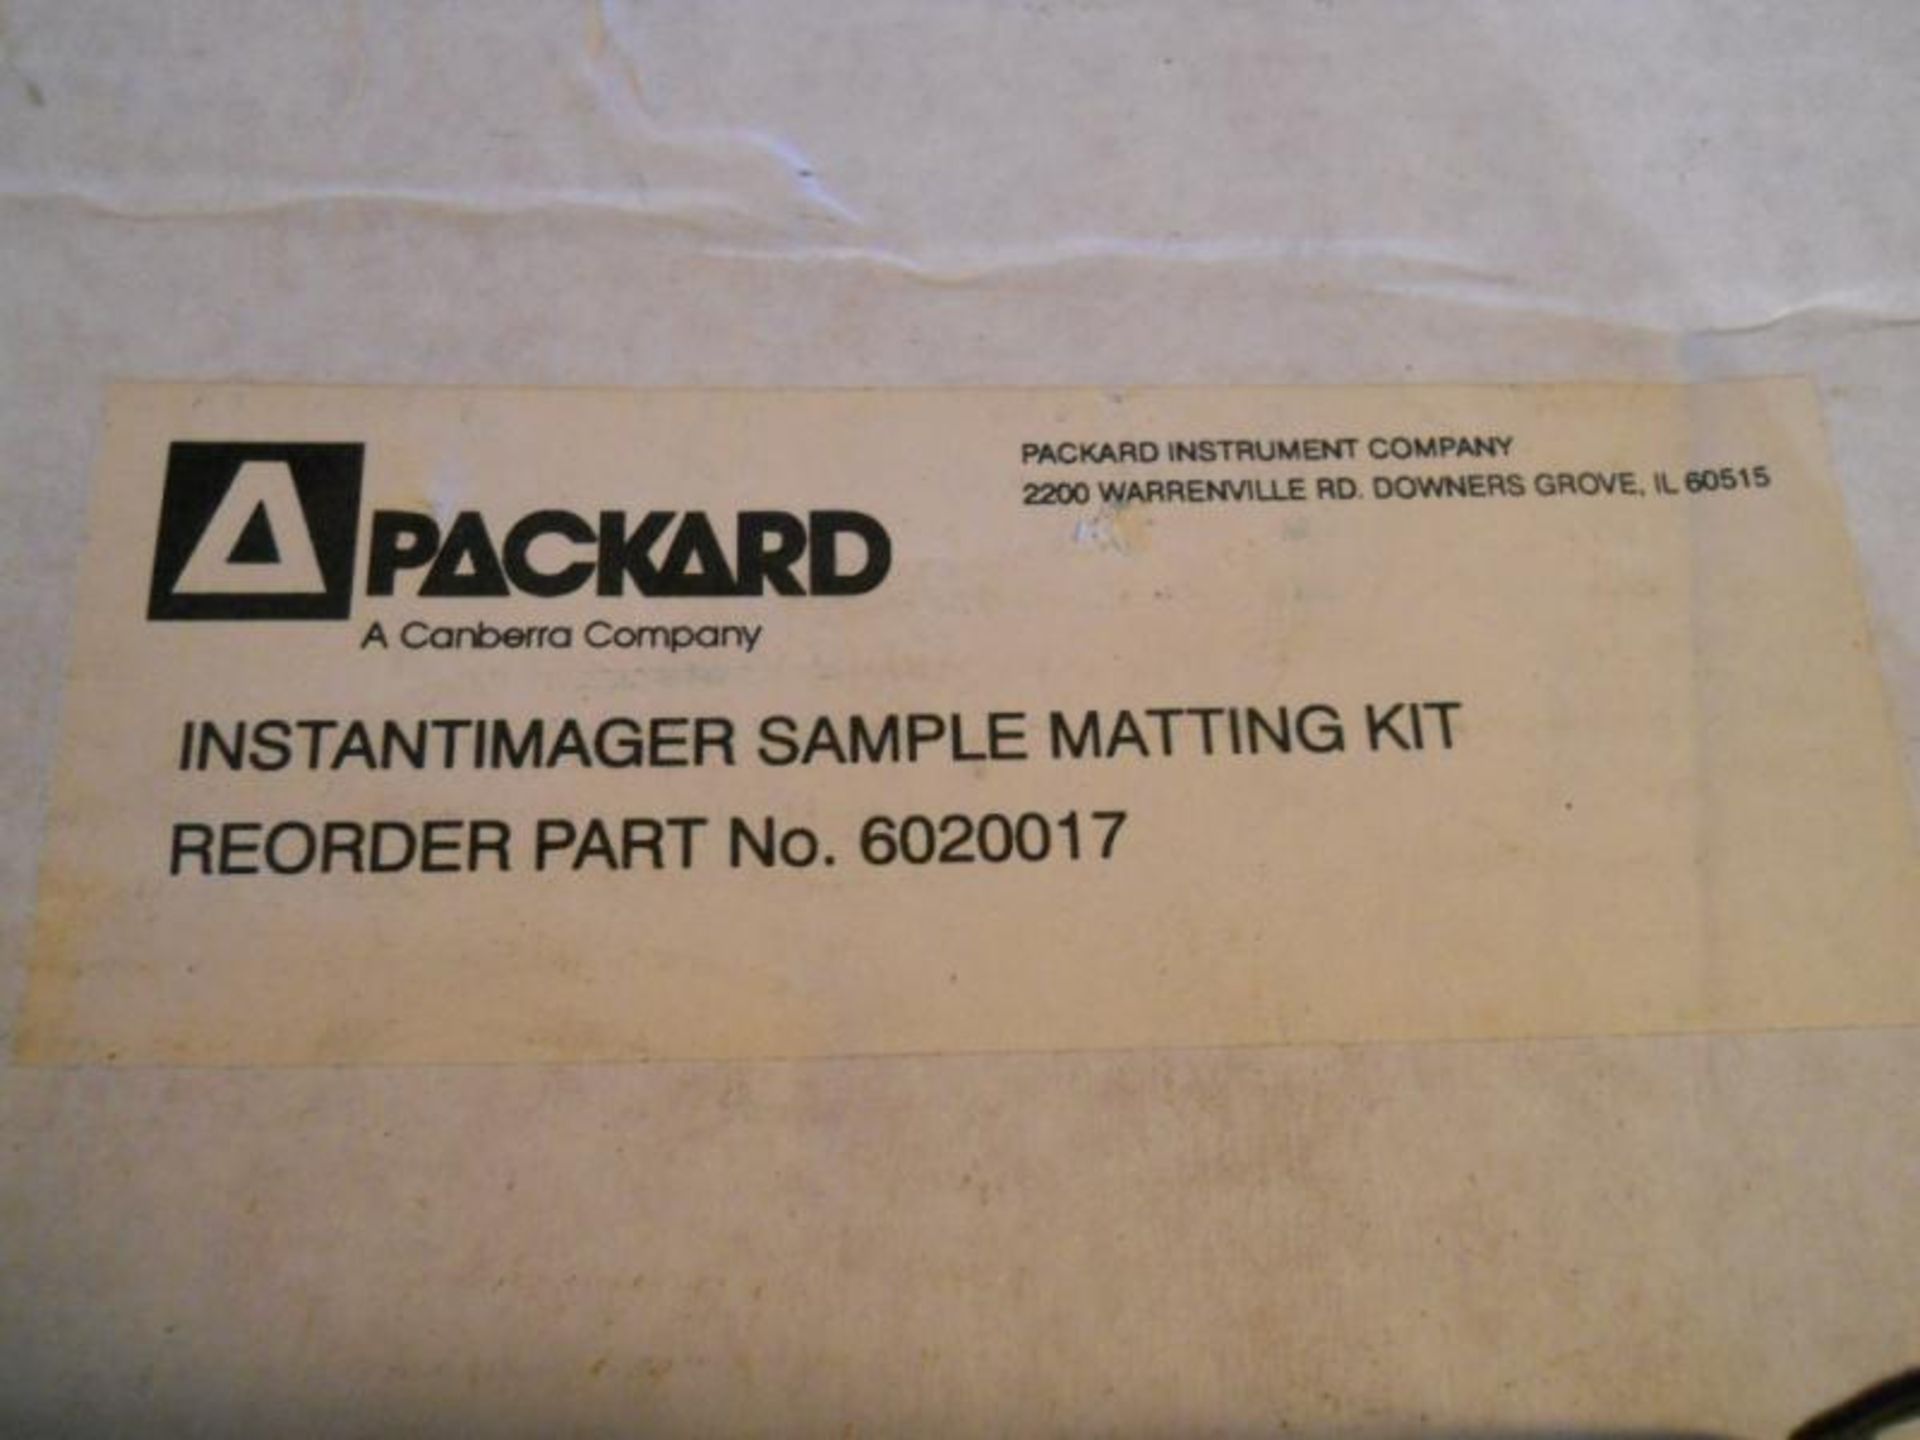 Packard InstantImager (Instant Imager) Sample Matting Kit 6020017, Qty 1, 331948739723 - Image 2 of 5